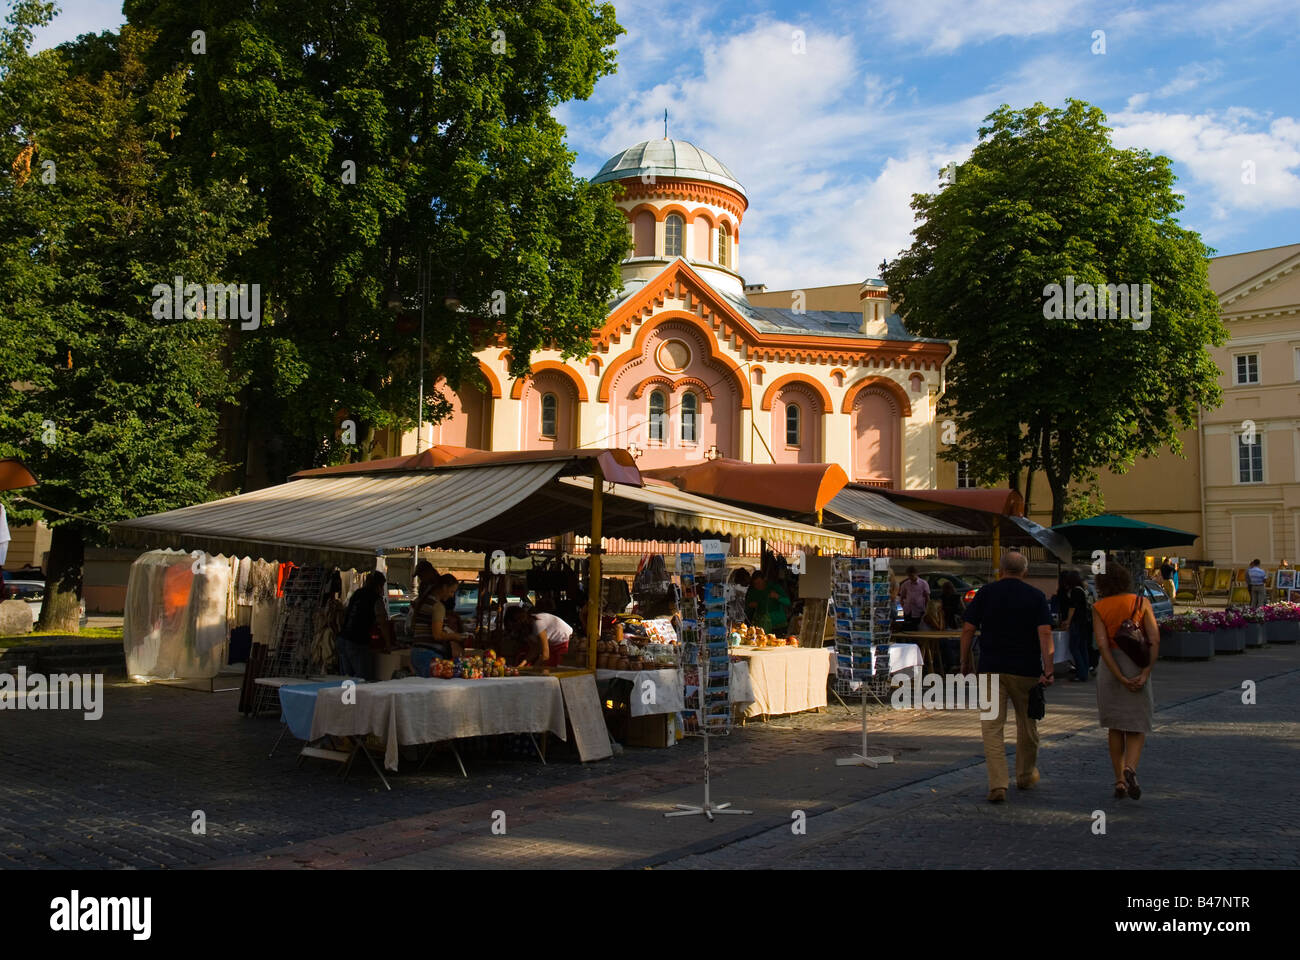 Market stalls along Pilies gatve street with St Parasceve s Orthodox church in background in Vilnius Lithuania Europe Stock Photo